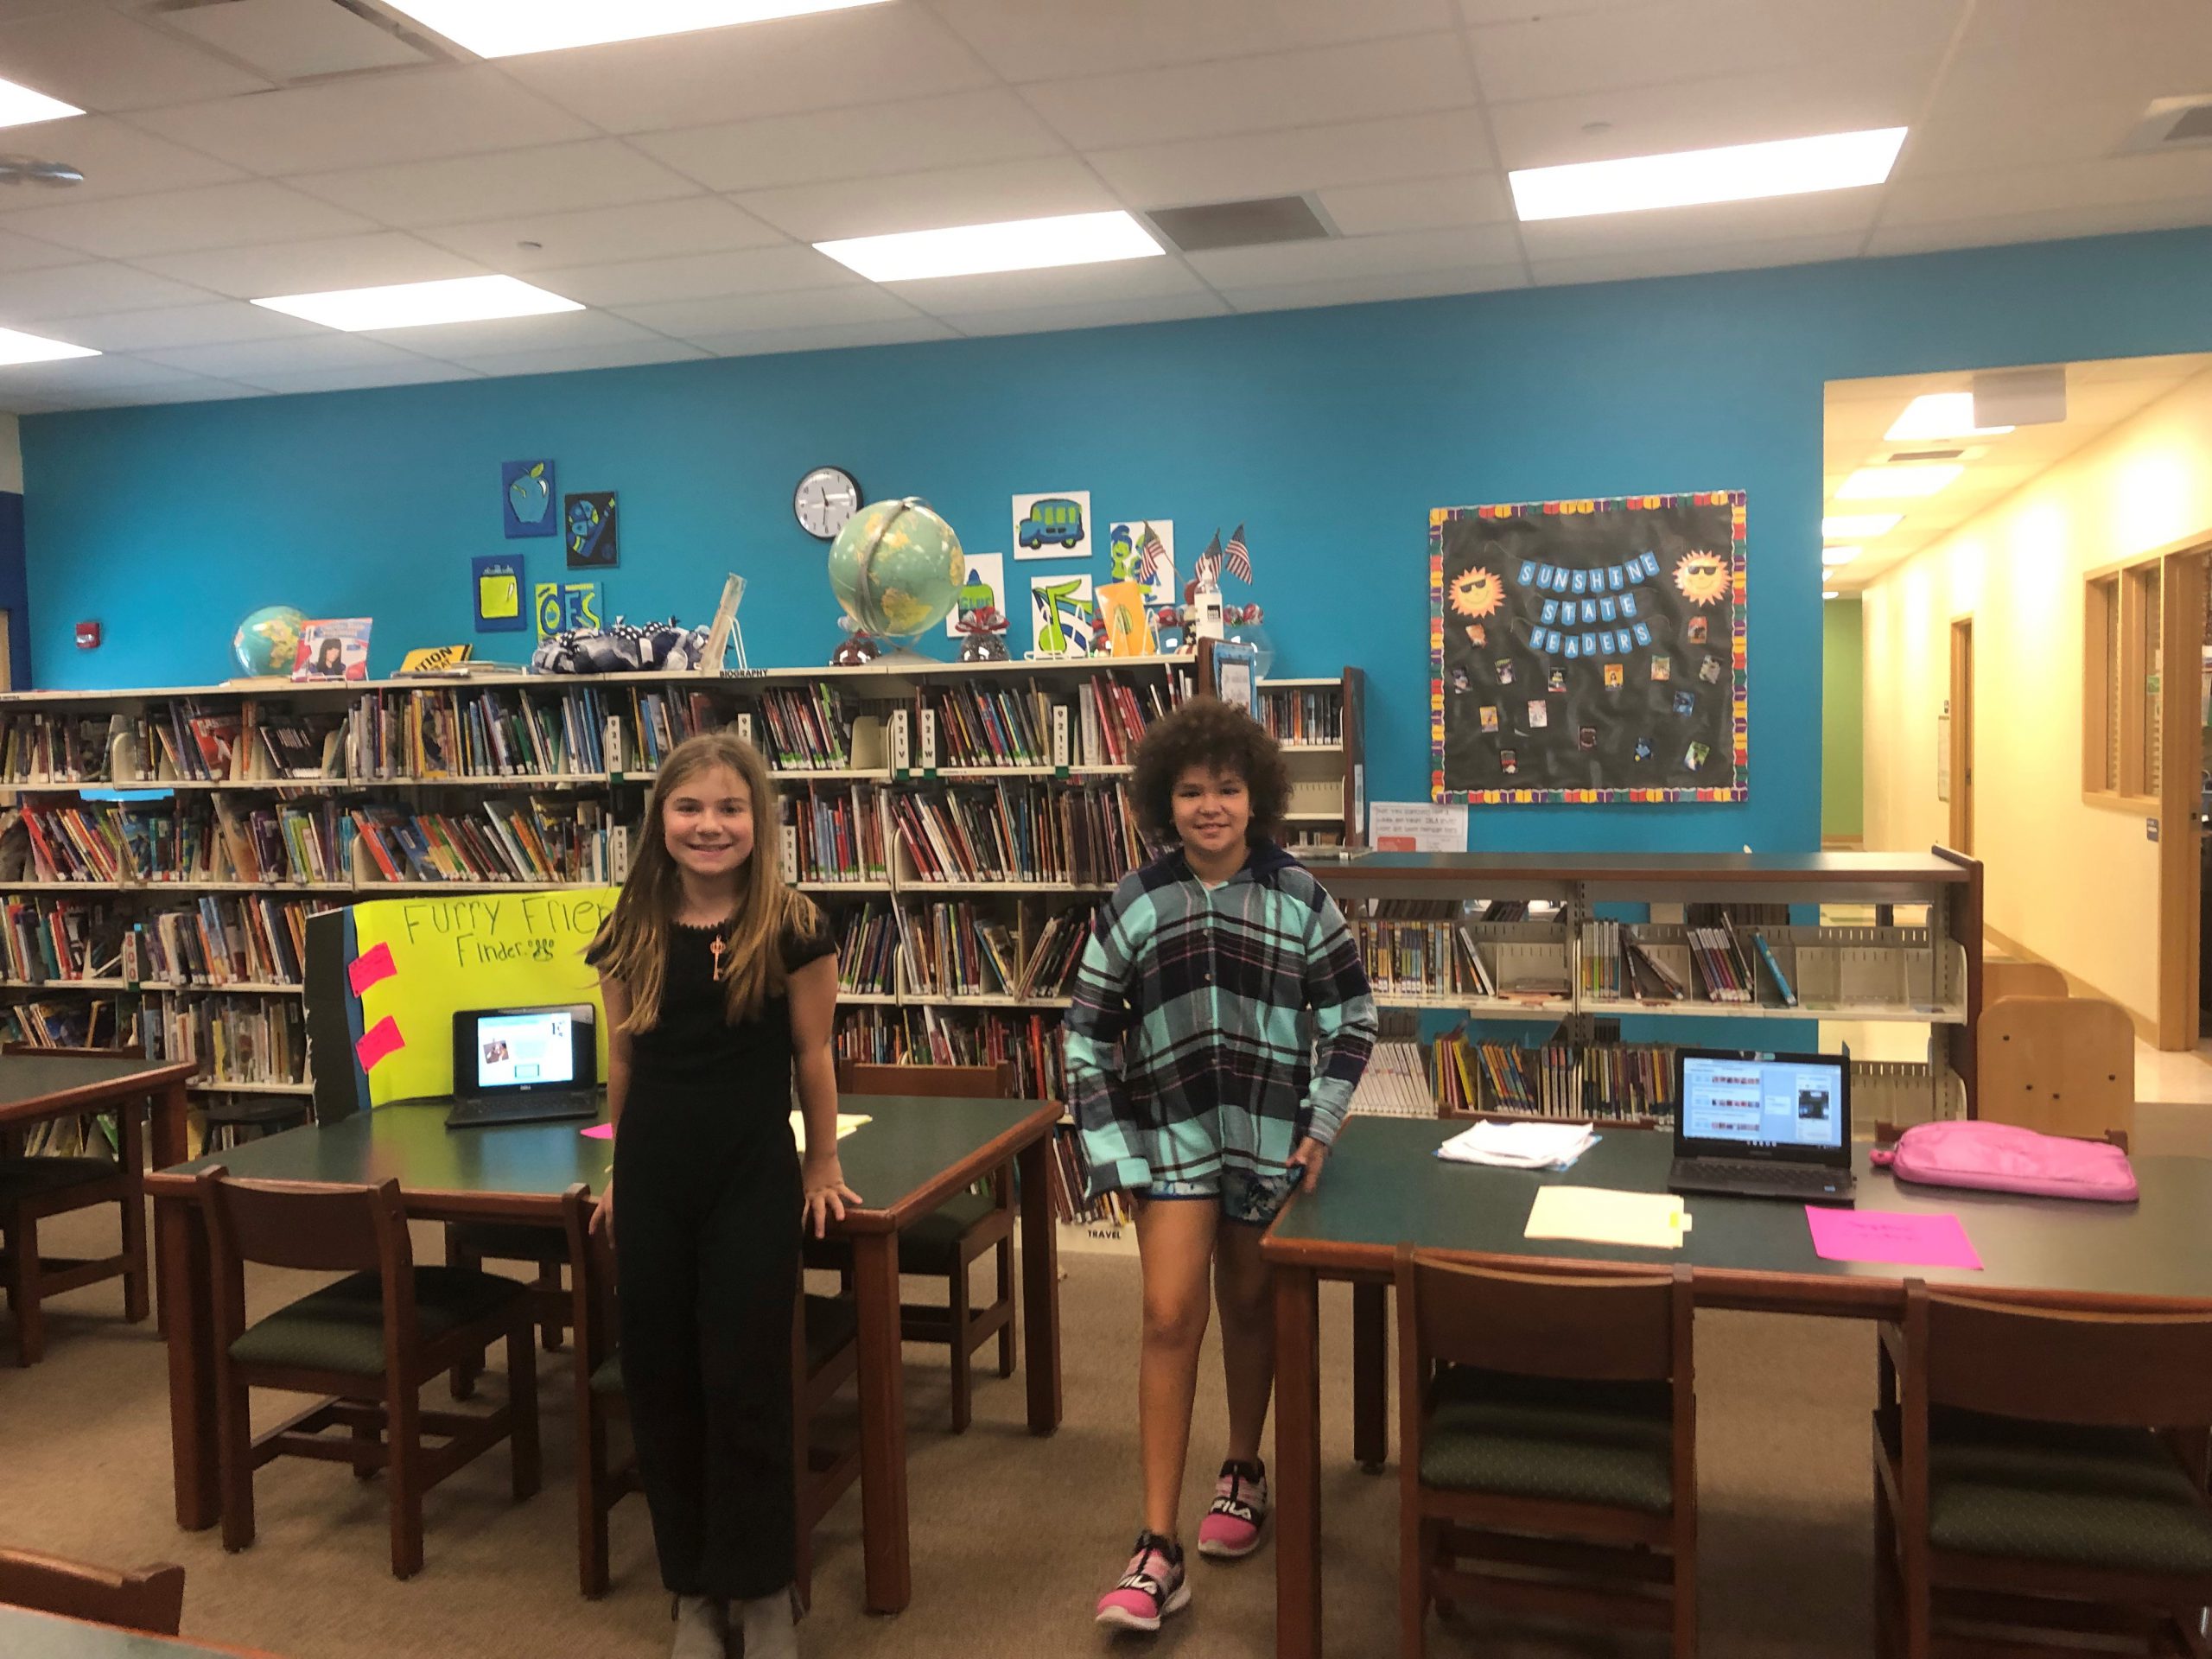 Two students standing near tables in the media center.